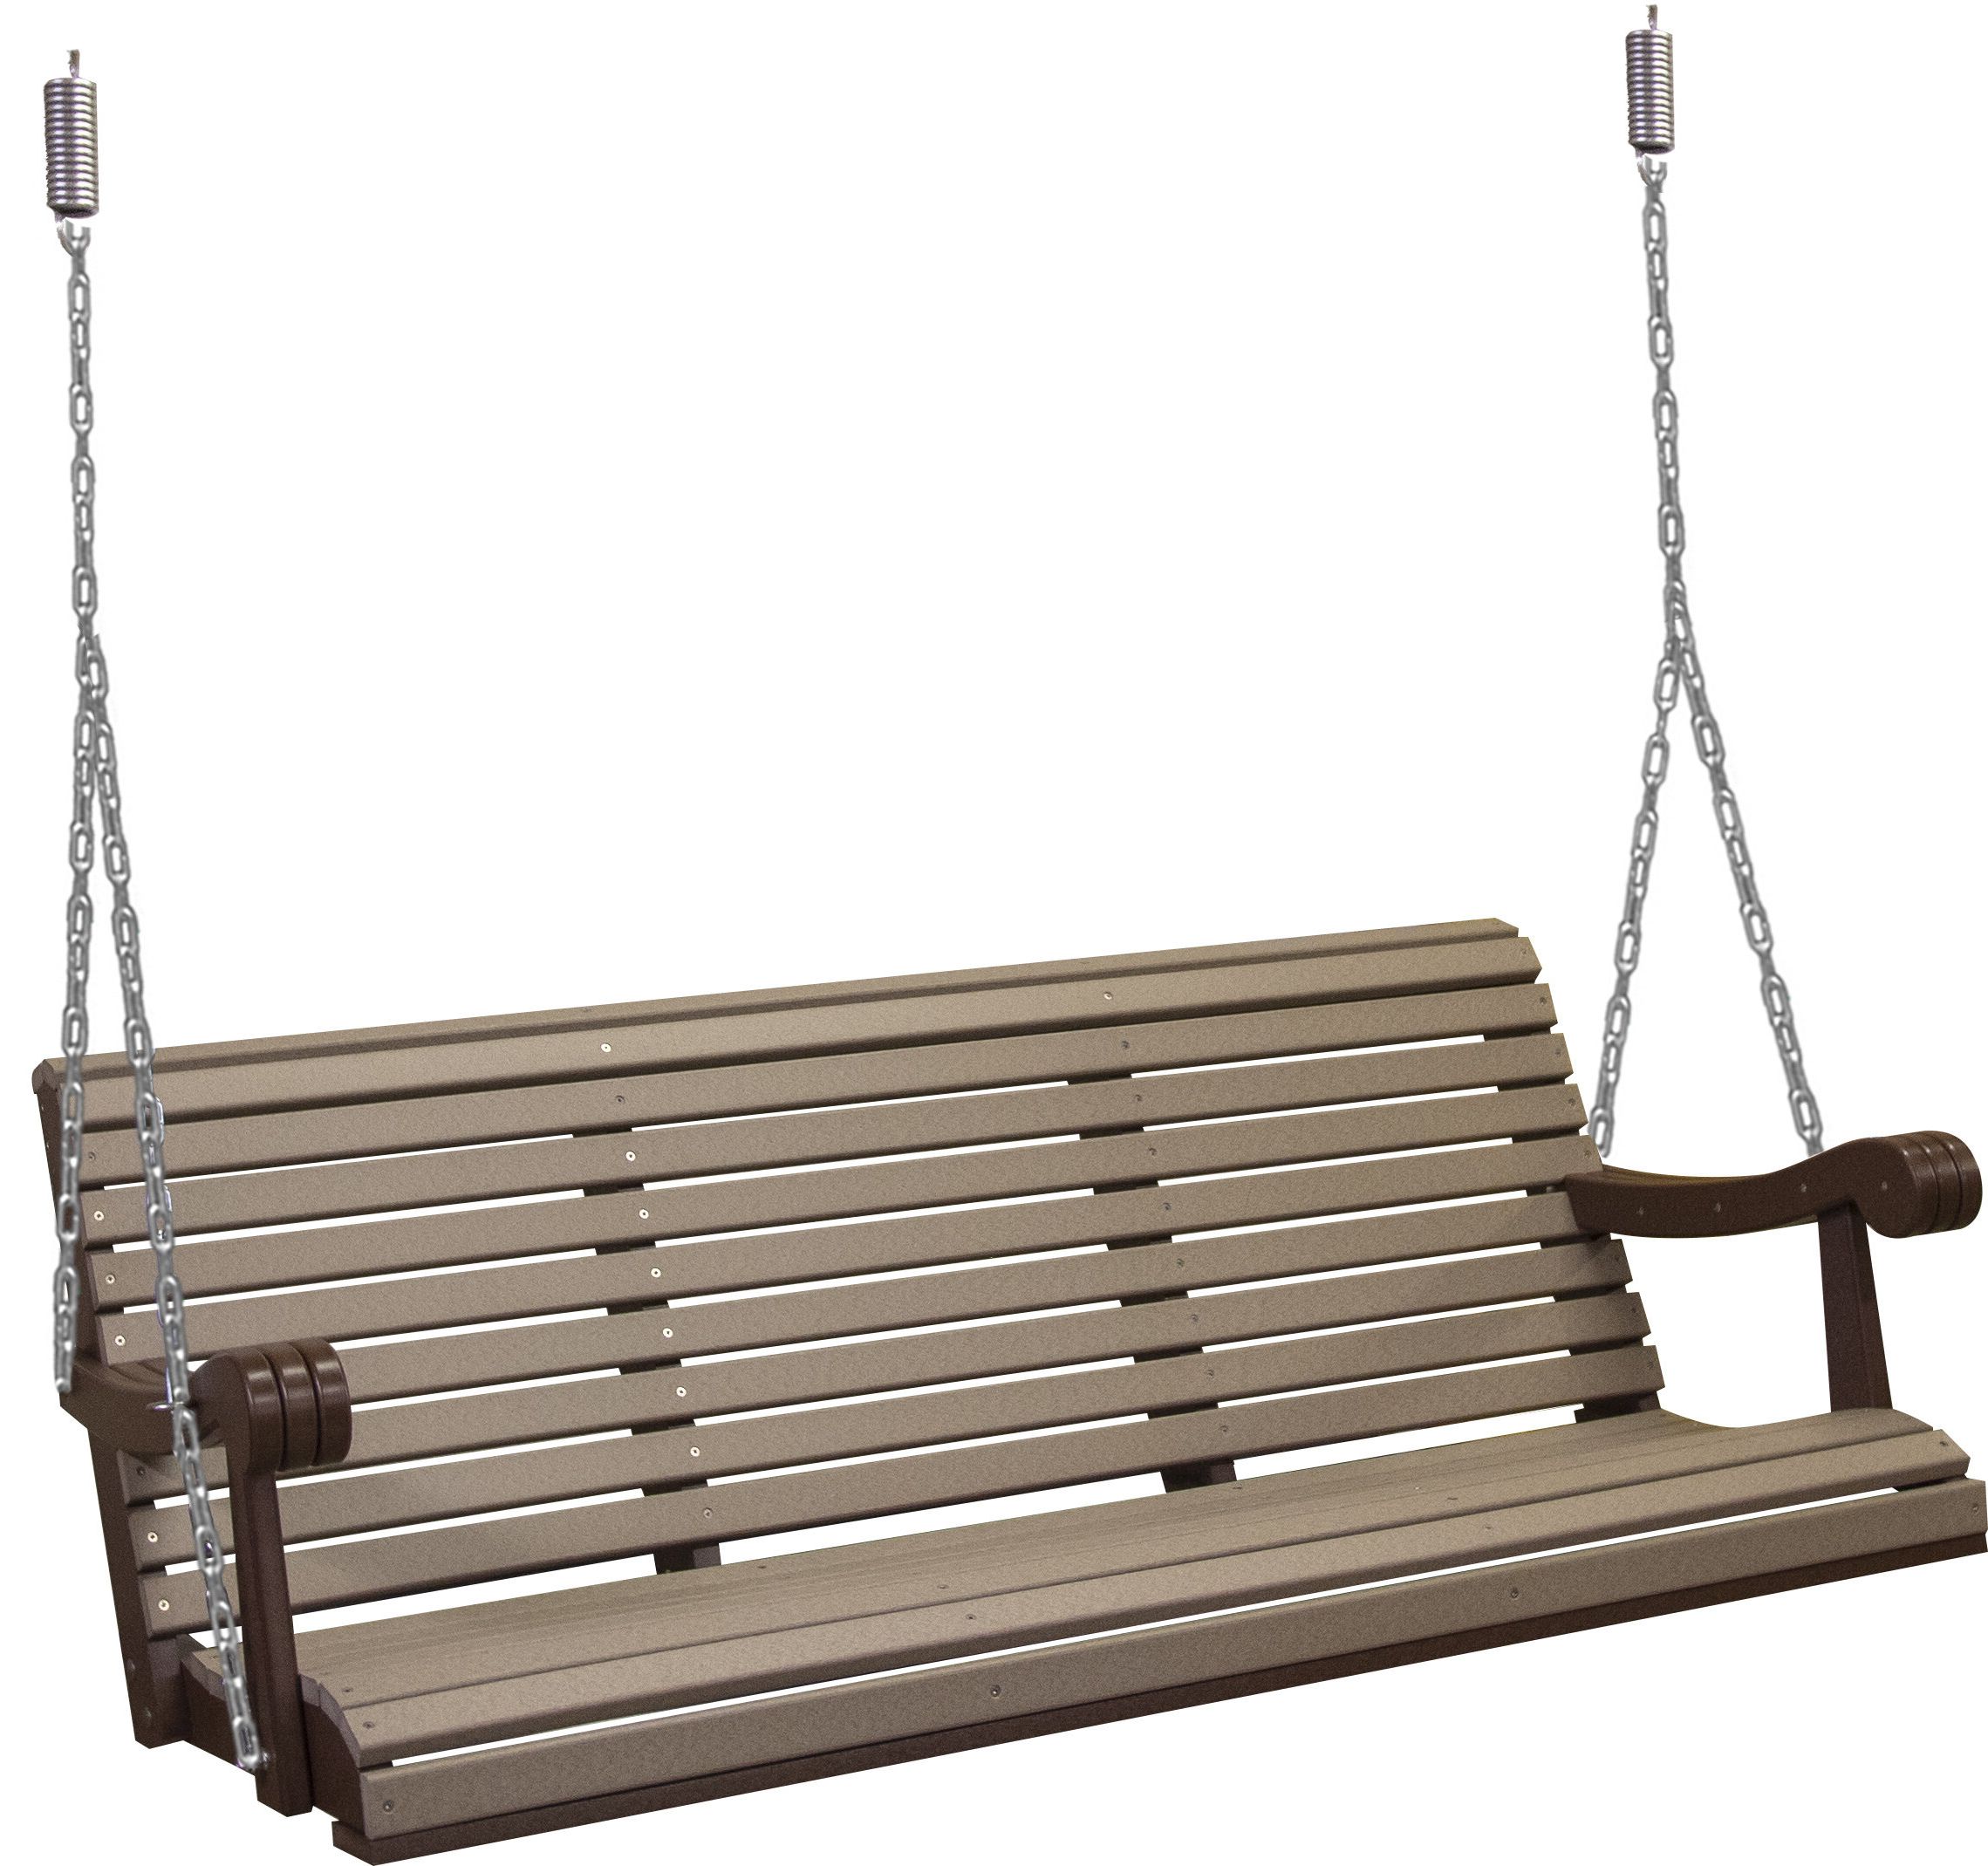 Fleurette Poly Grandpa Porch Swing Intended For Best And Newest Contoured Classic Porch Swings (View 21 of 25)